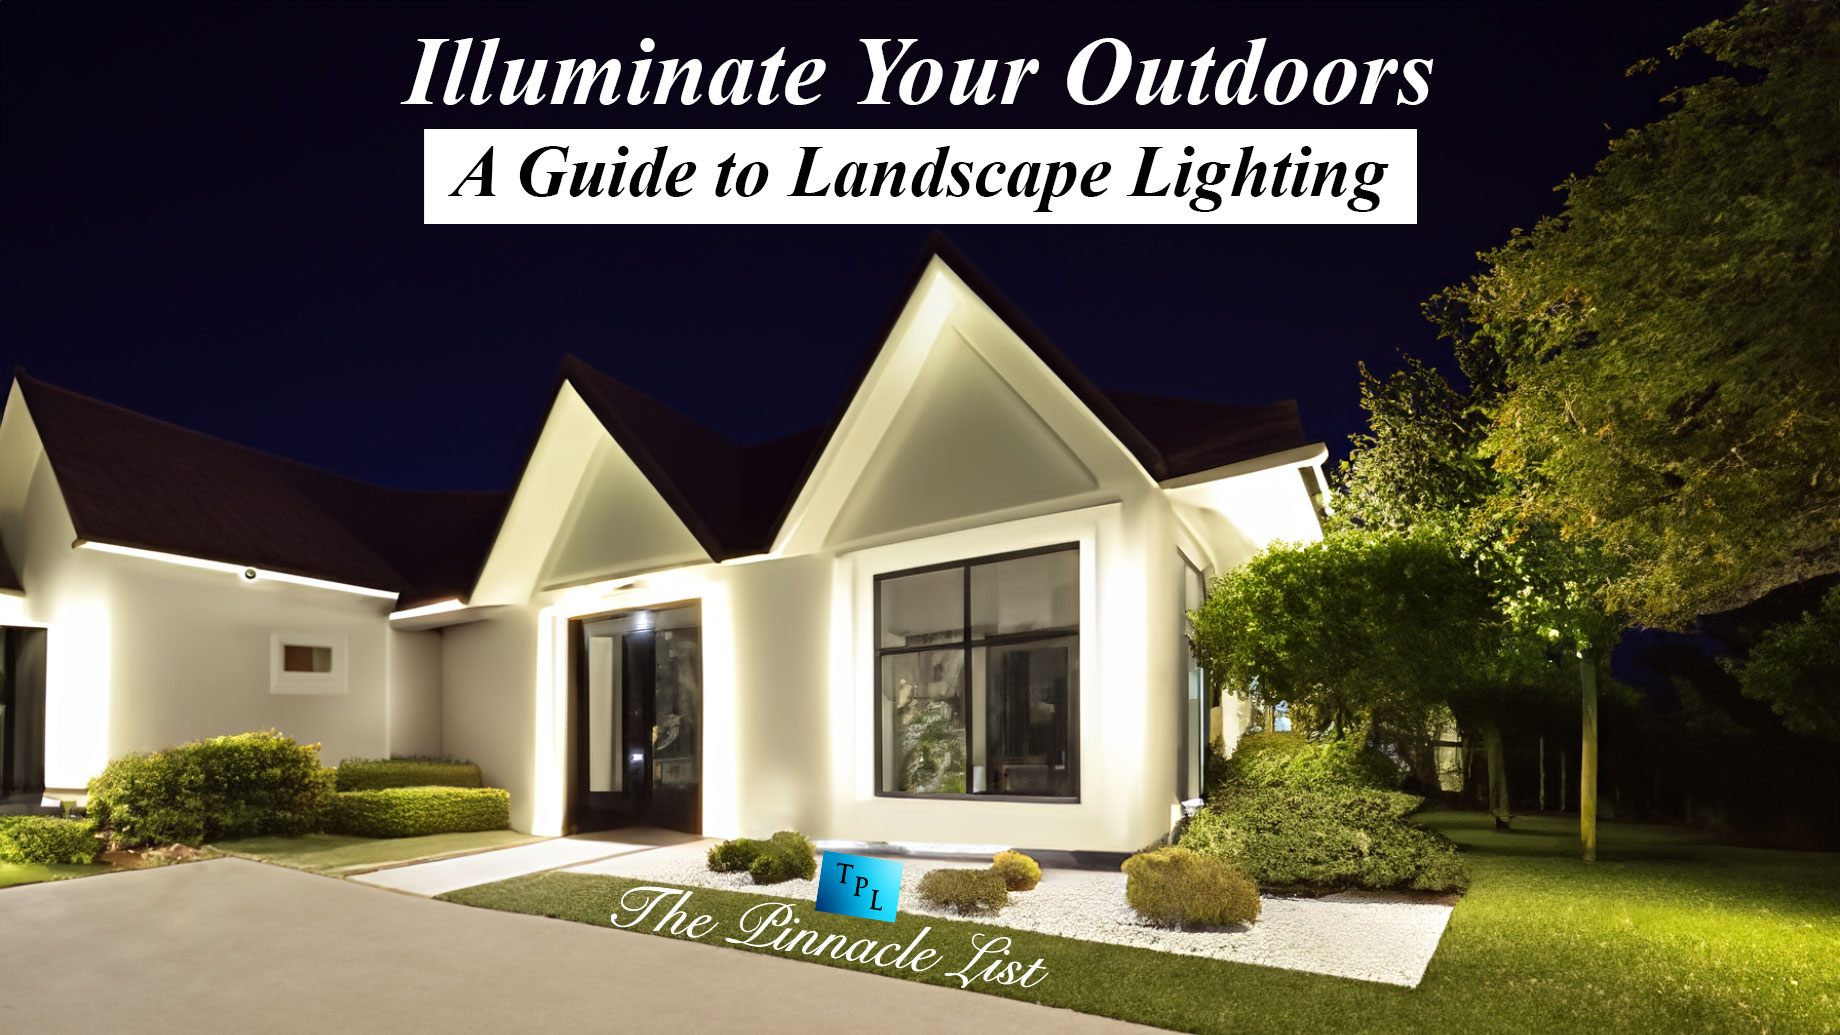 Illuminate Your Outdoors: A Guide to Landscape Lighting